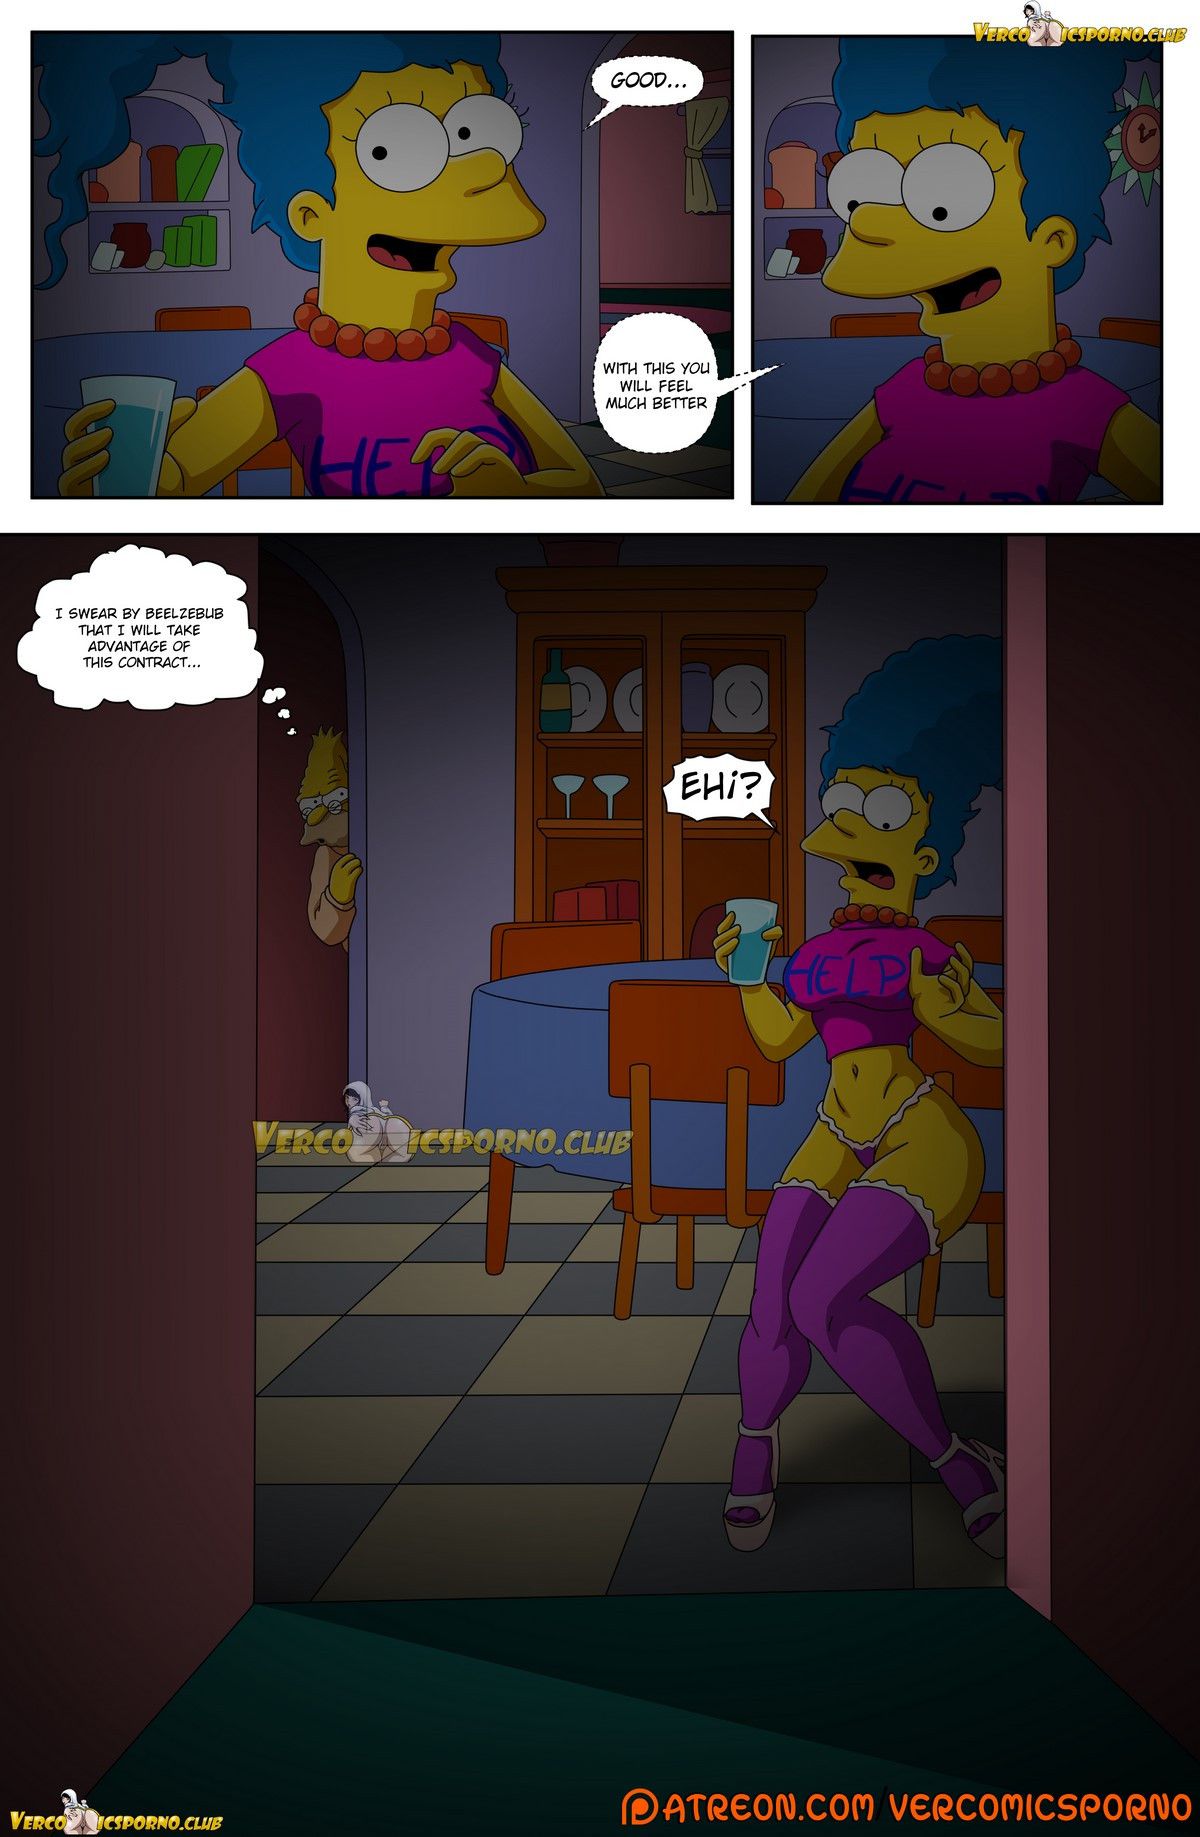 Grandpa and me - [Itooneaxxx] - [Drah Navlag] - [VCP] - [The Simpsons] 61